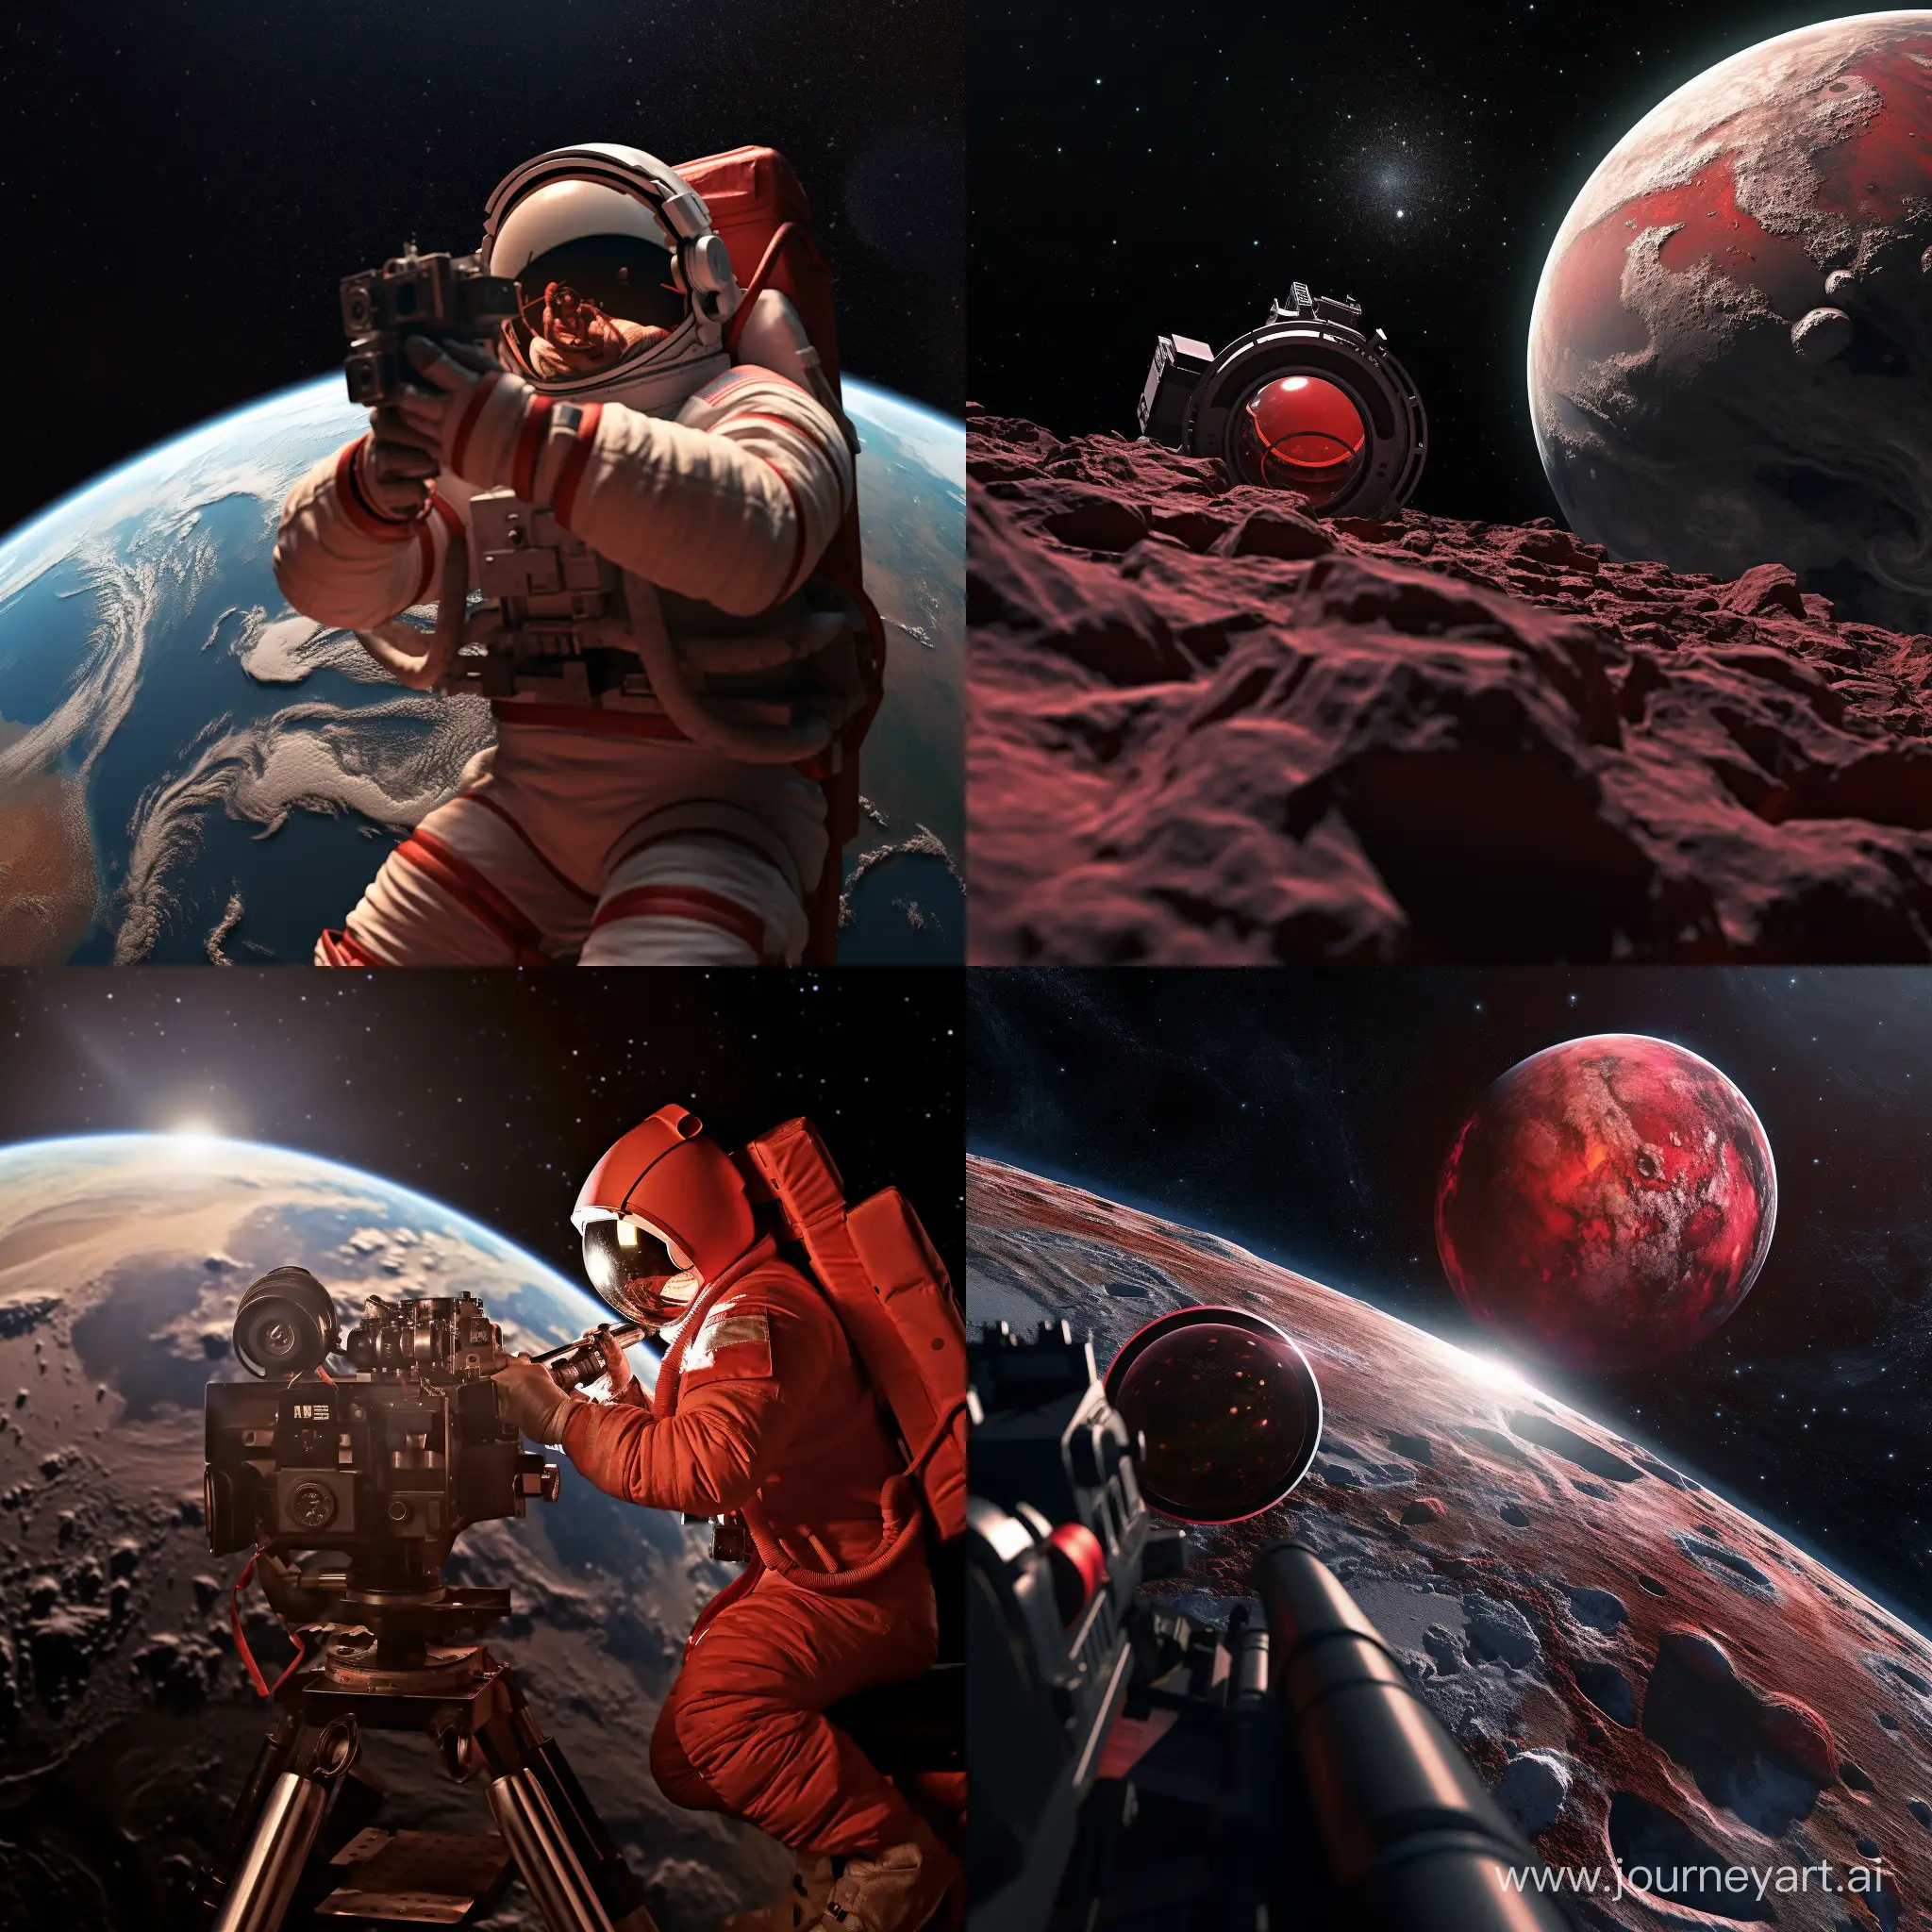 /img You are an astronaut photographer shooting the planet earth from the surface of the moon, high-resolution images, in red, crimson tones, object detail, nikon d850 camera